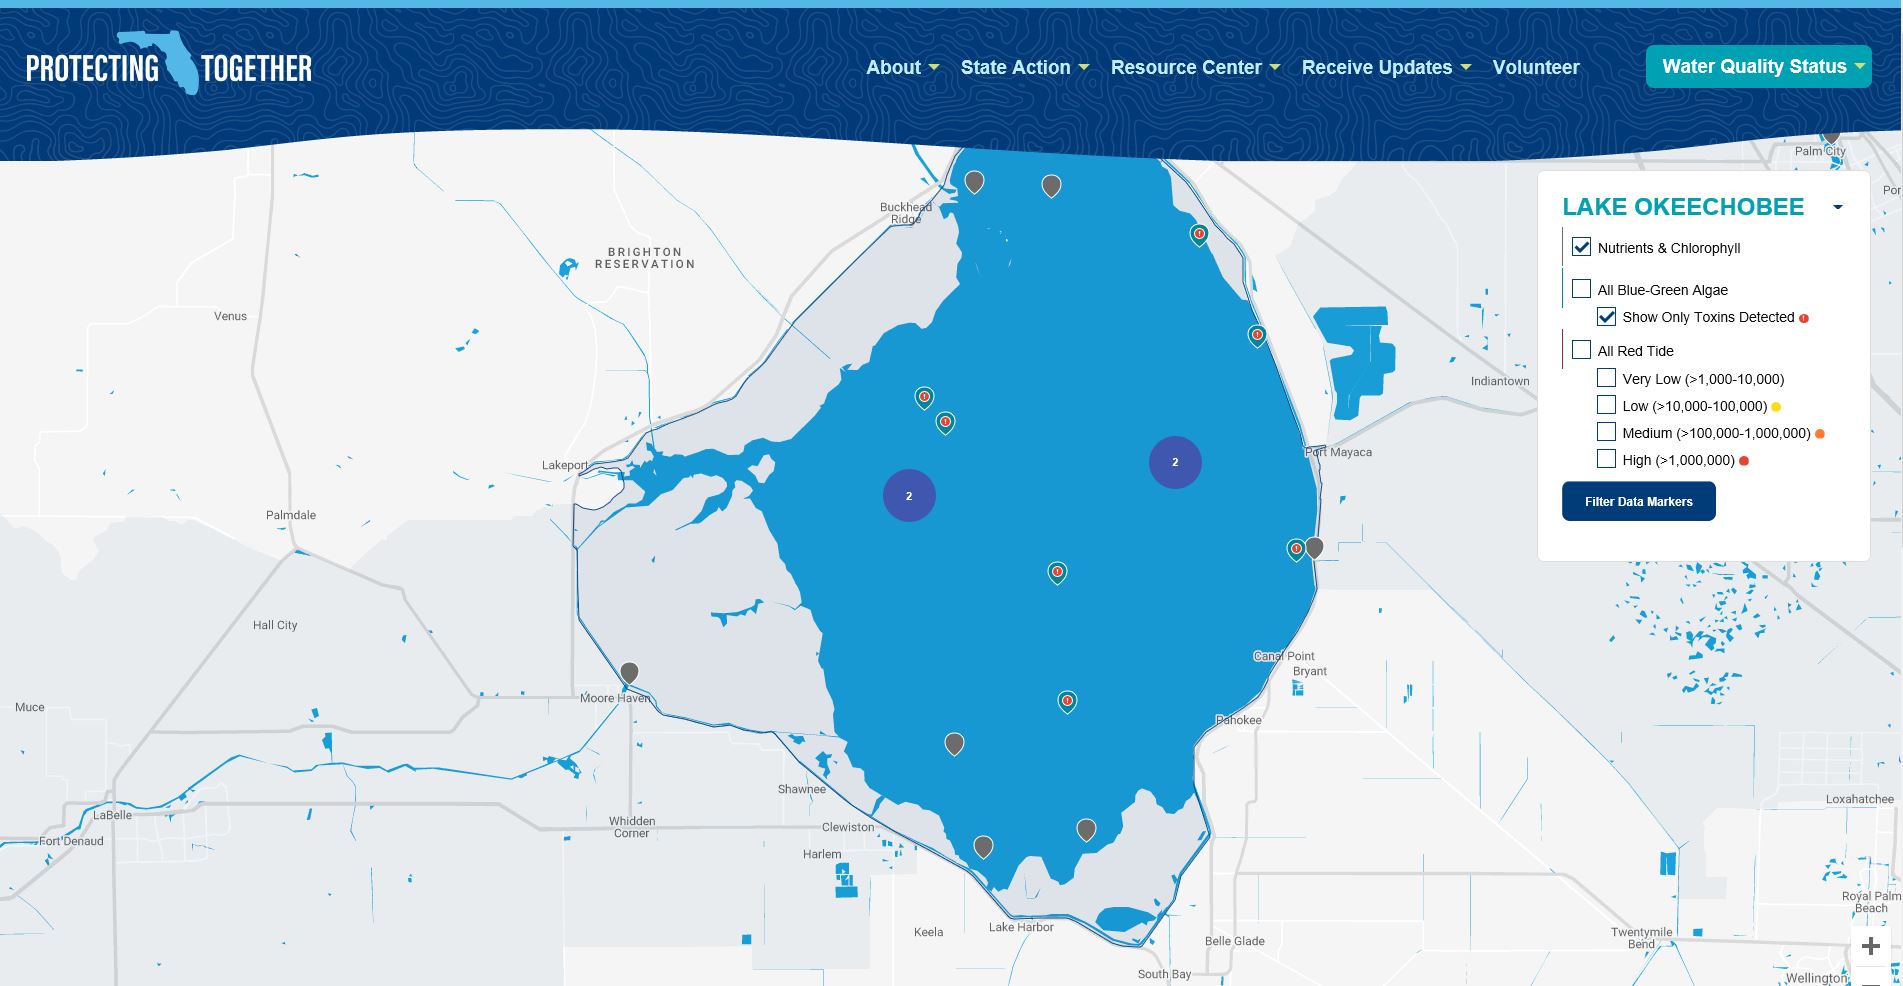 Florida Department of Environmental Protection's Protecting Florida Together water quality status map